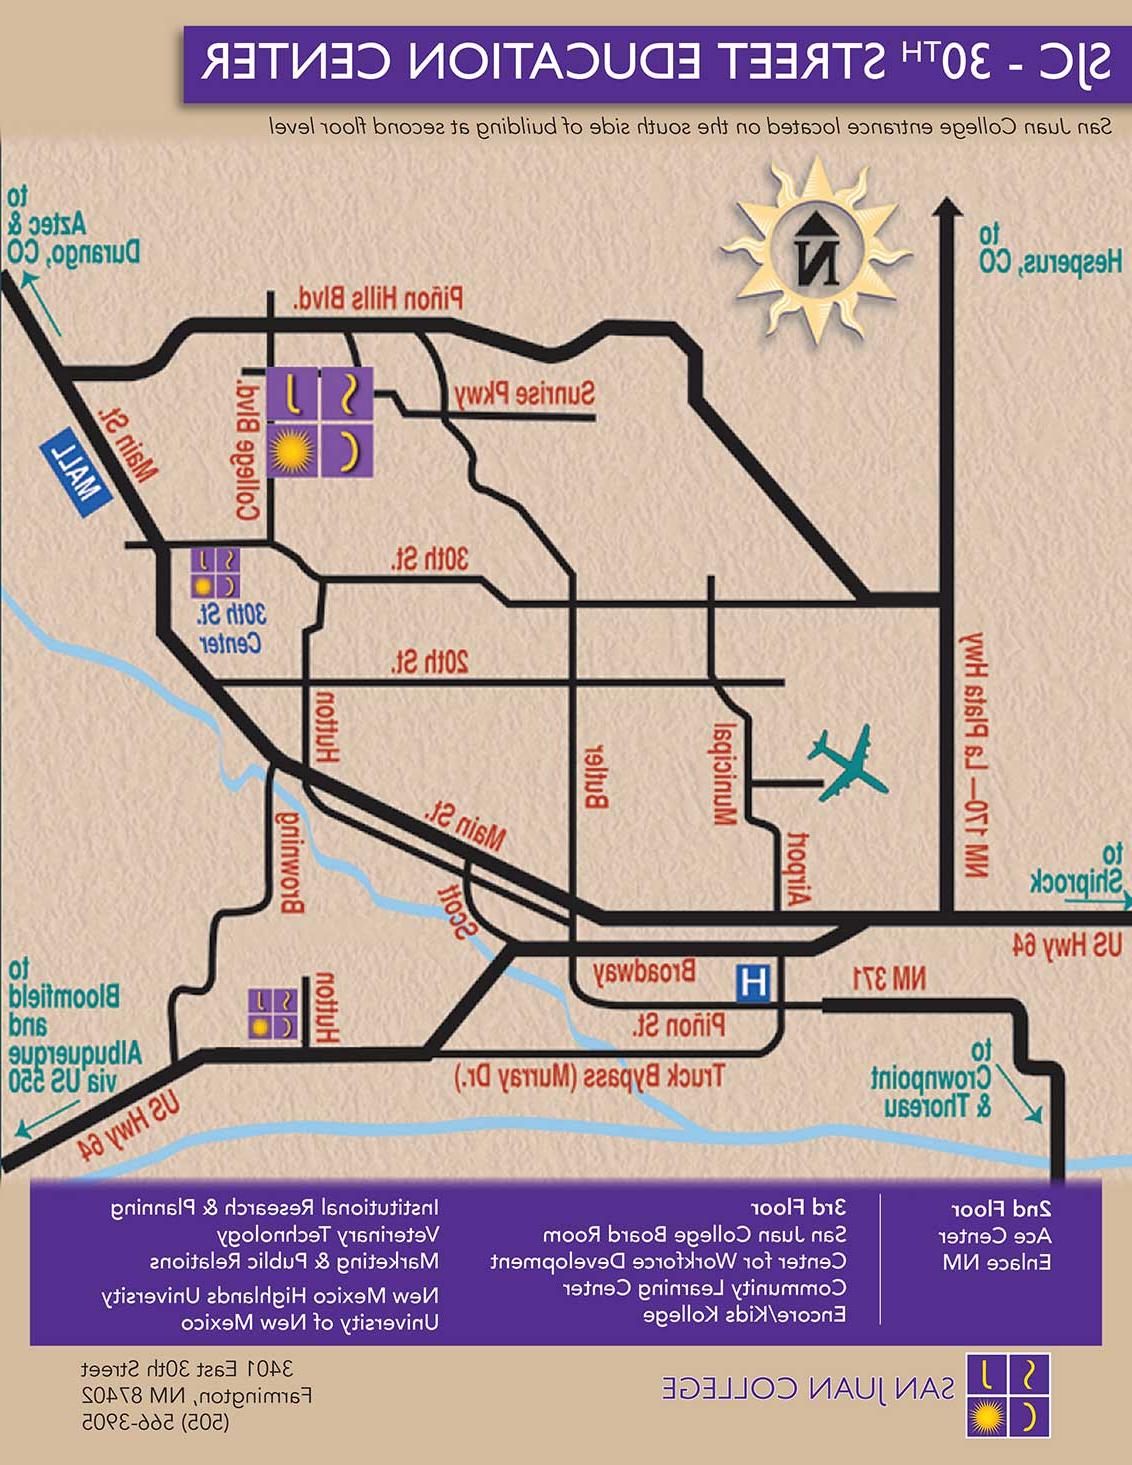 30th st map. If you need assistance with wayfinding please contact disability services at (505) 566-3643 or (505) 566-3271.